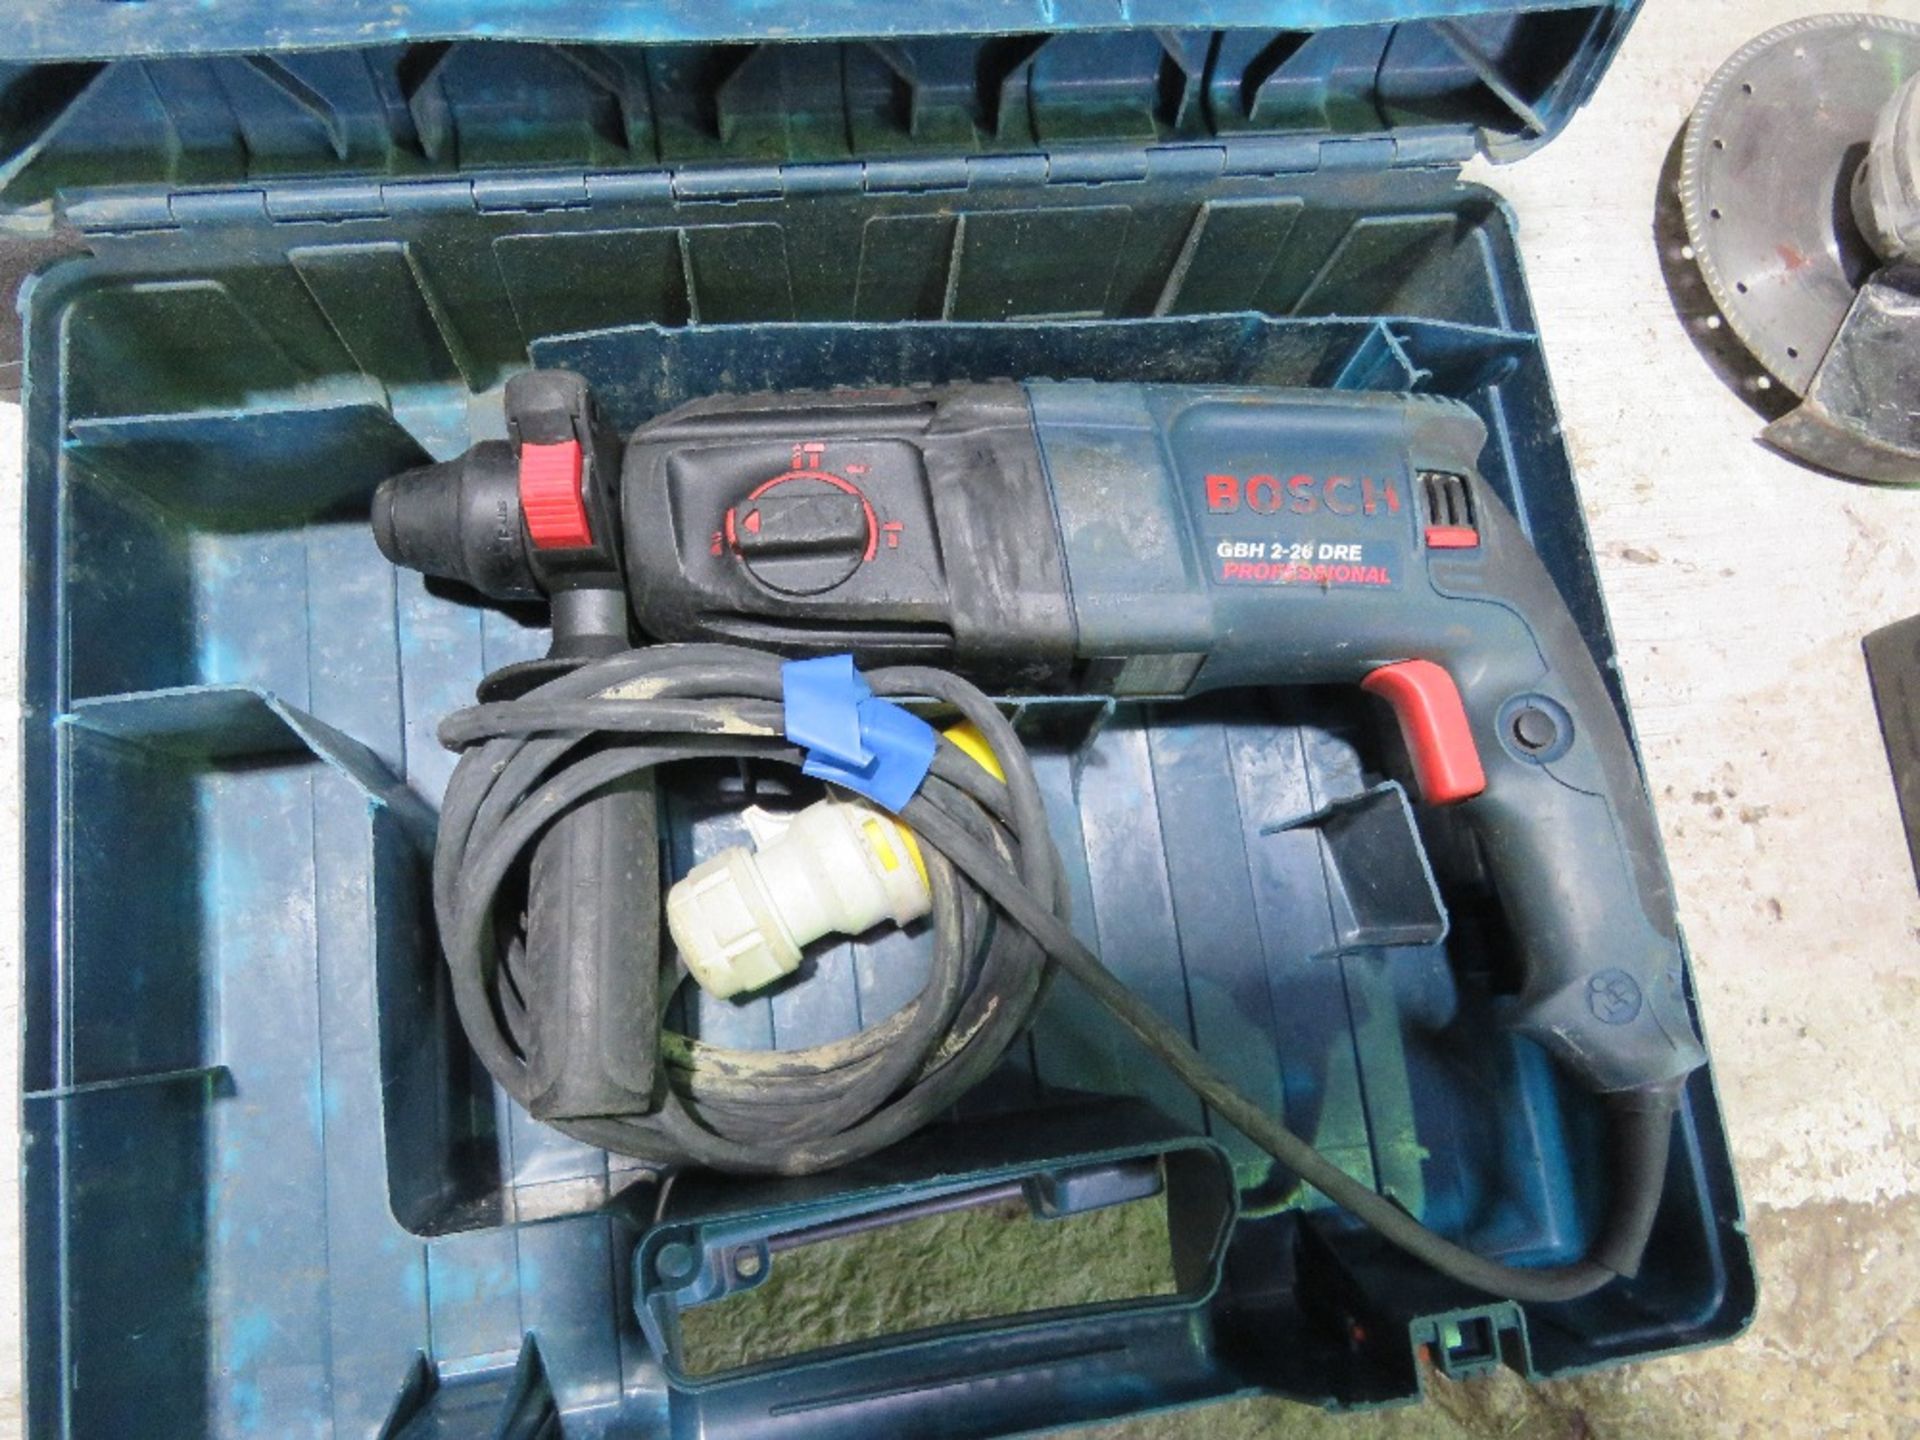 4NO 110VOLT POWERED DRILLS.....THIS LOT IS SOLD UNDER THE AUCTIONEERS MARGIN SCHEME, THEREFORE NO VA - Image 5 of 7